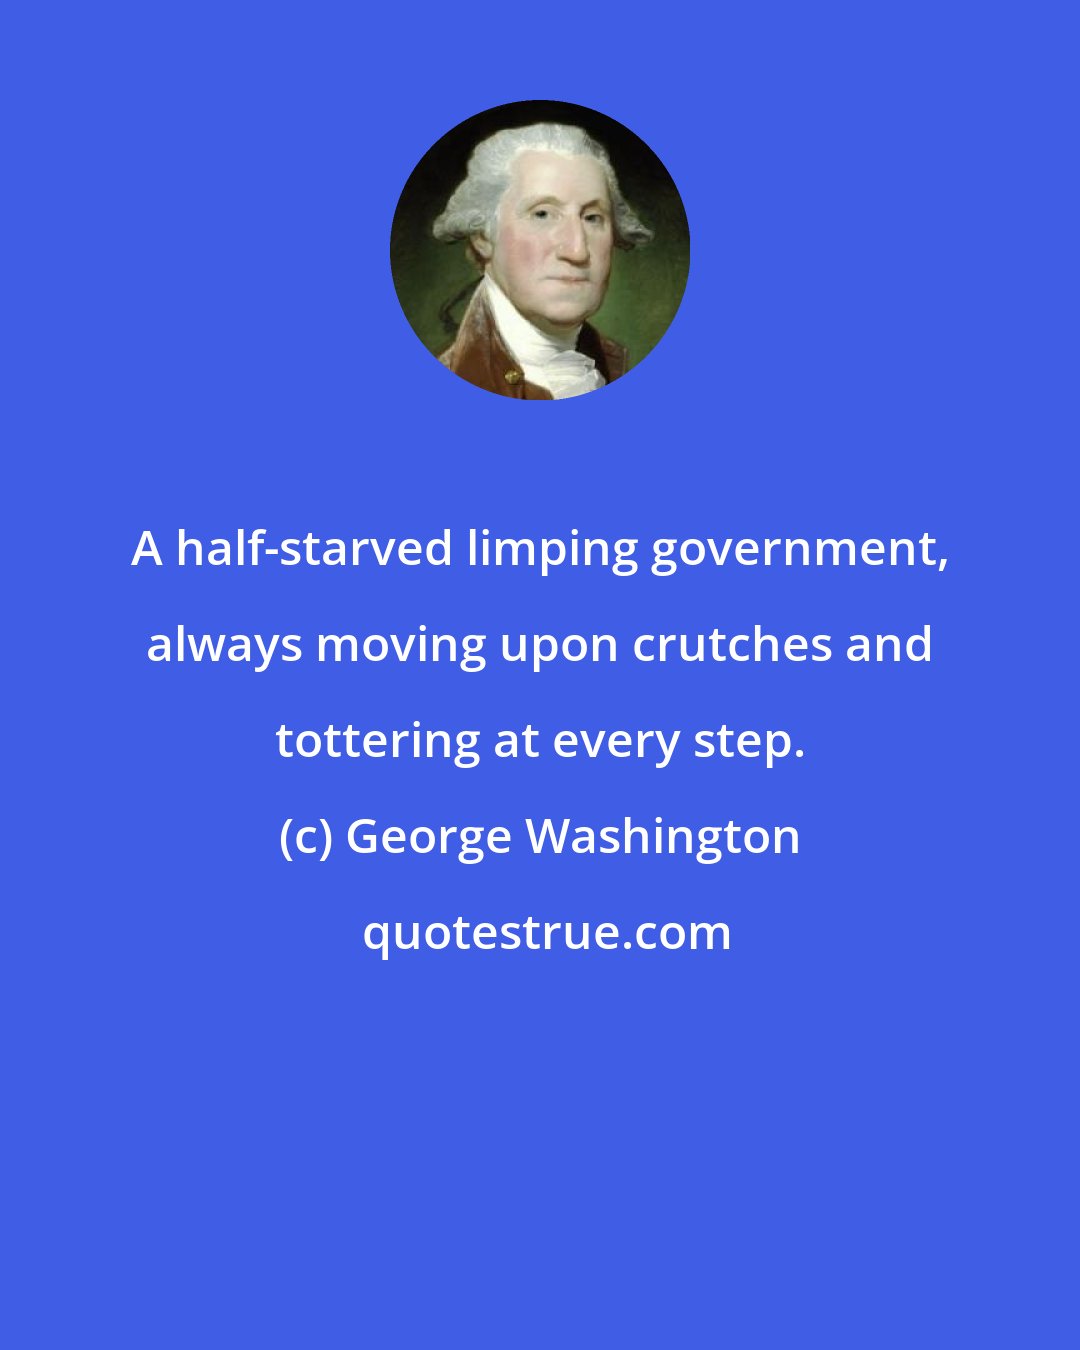 George Washington: A half-starved limping government, always moving upon crutches and tottering at every step.